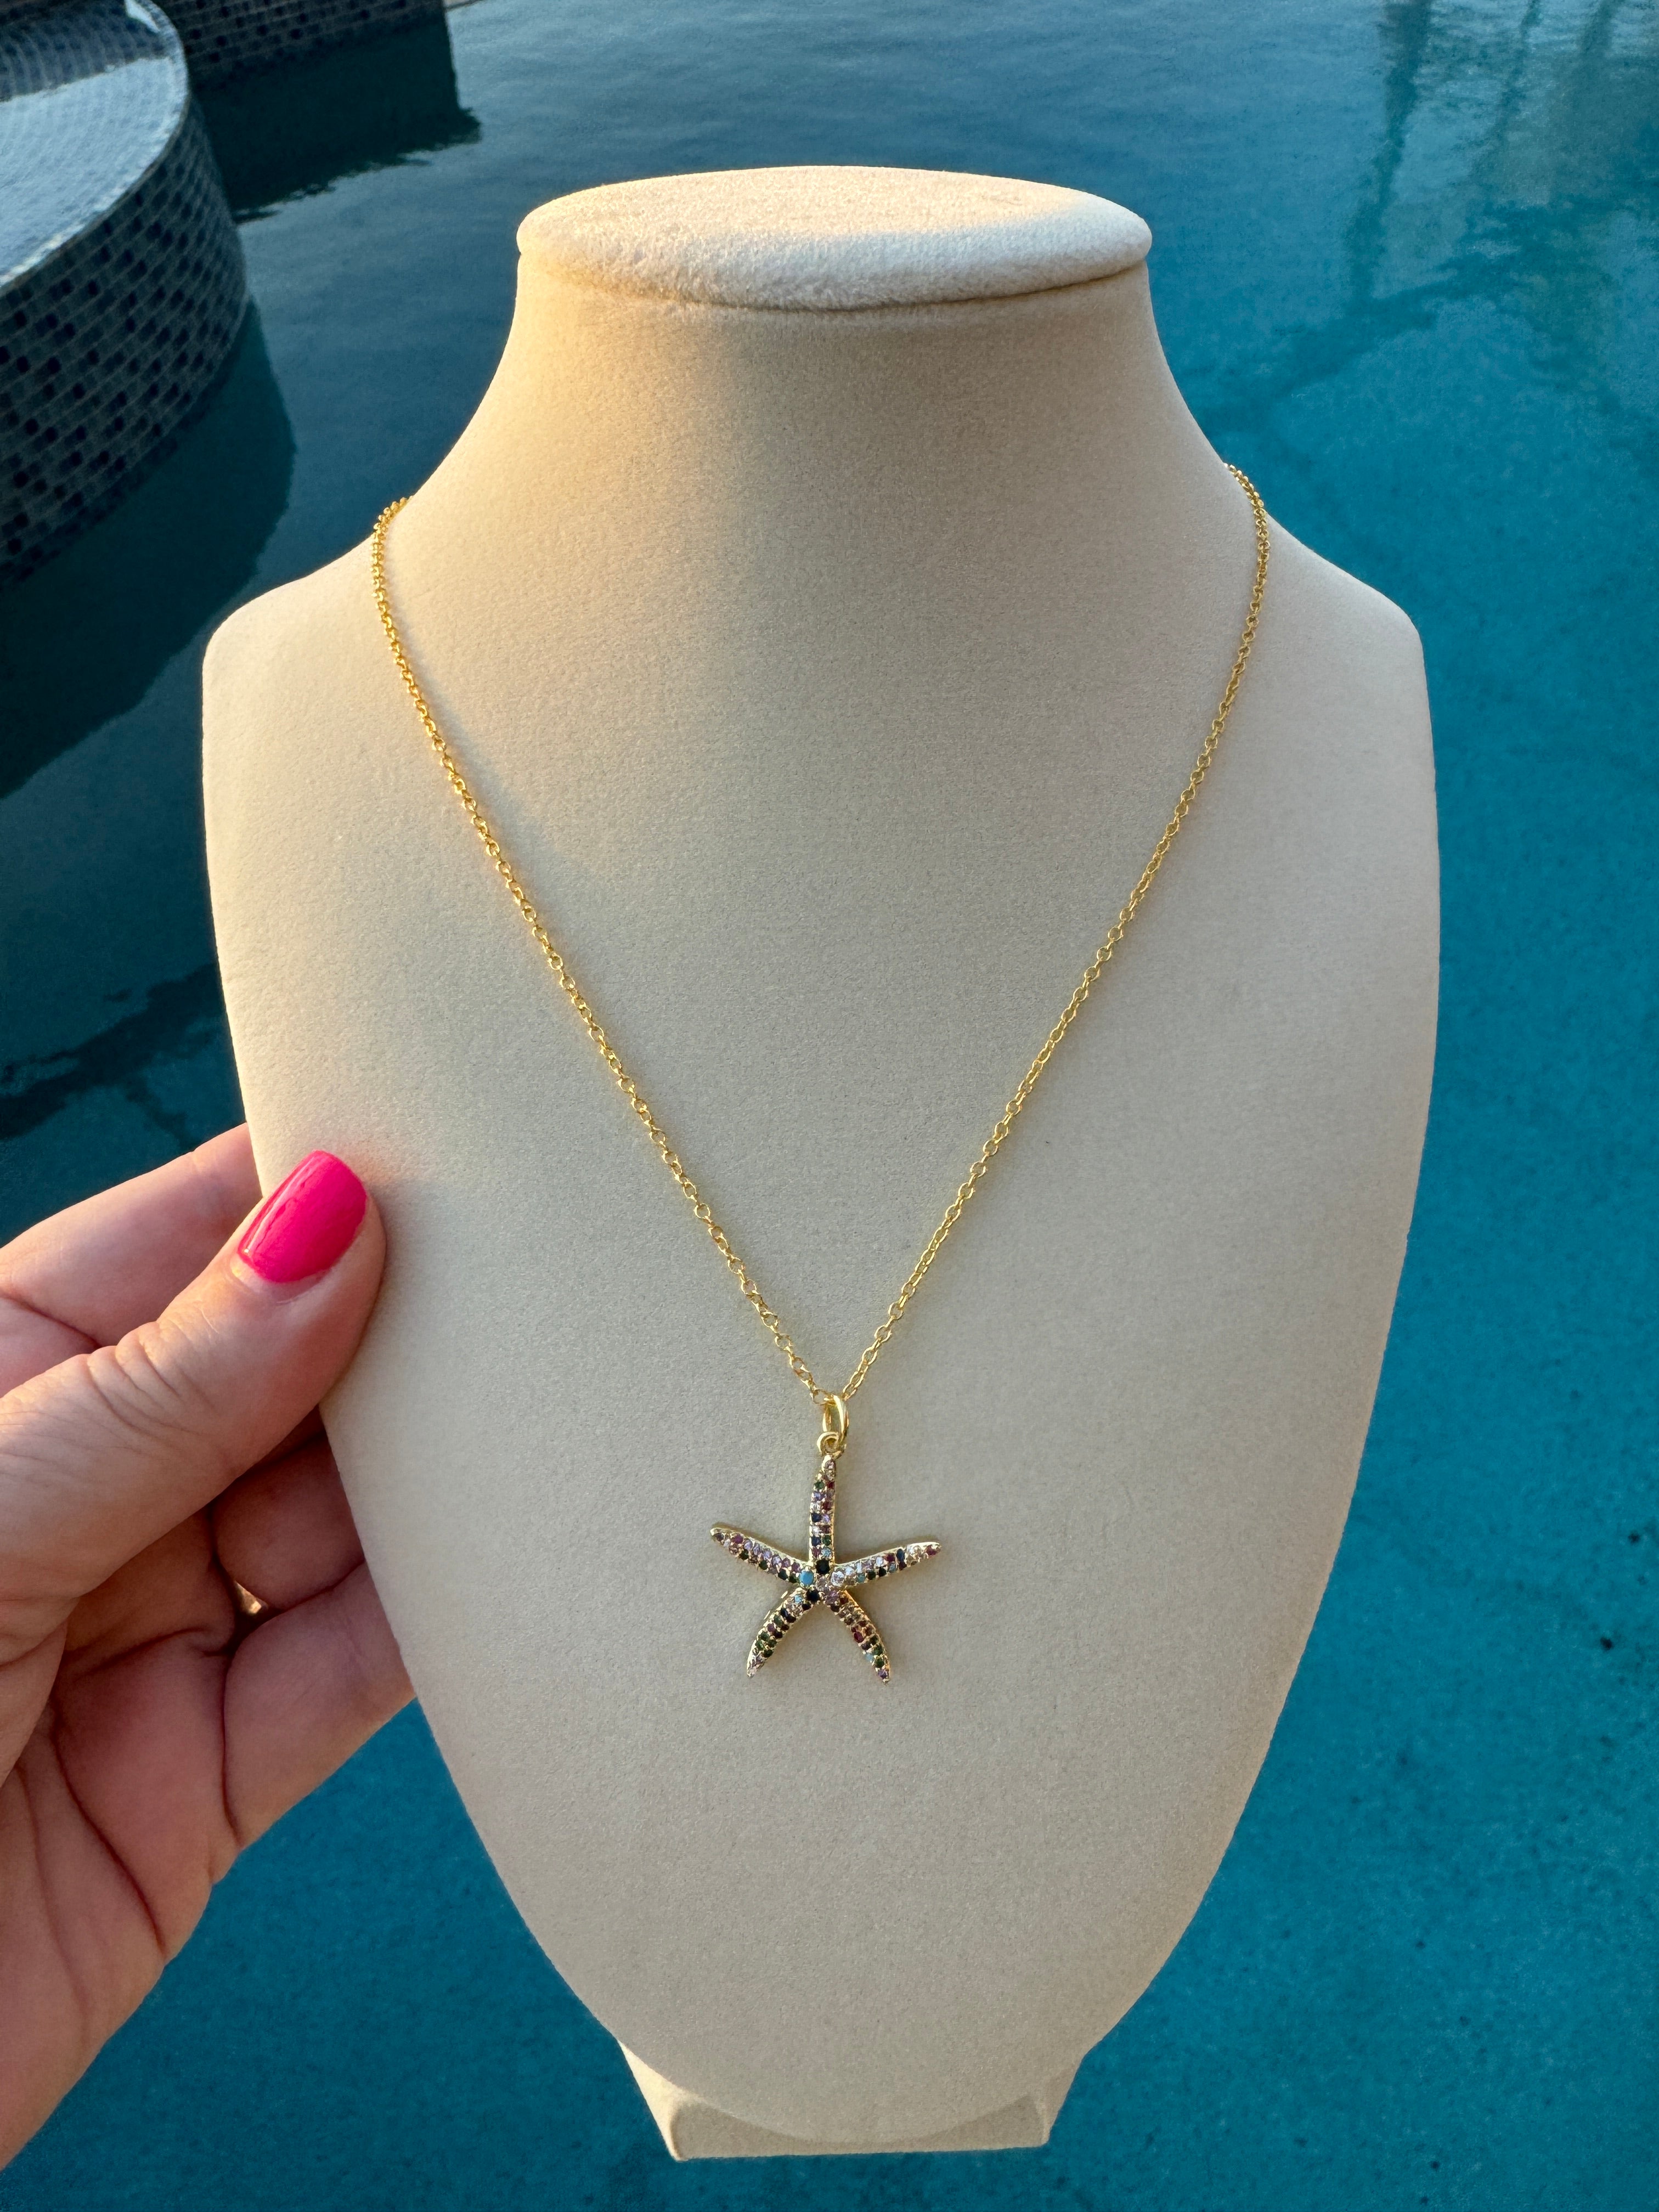 The Starfish Necklace